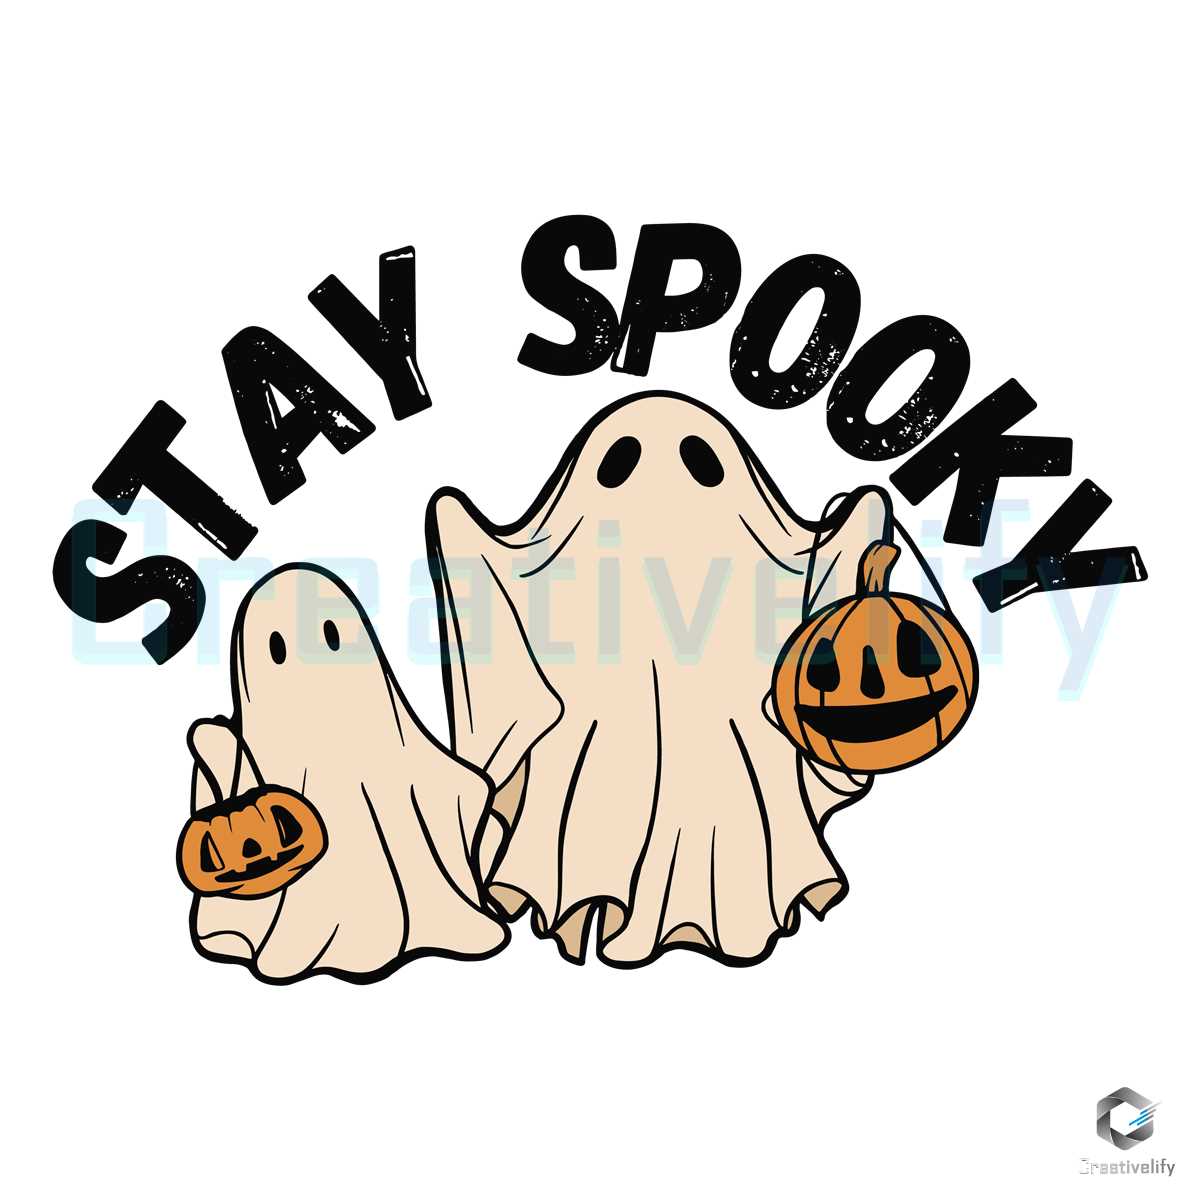 Stay Spooky Halloween SVG Pumpkin And Ghost Design - CreativeLify